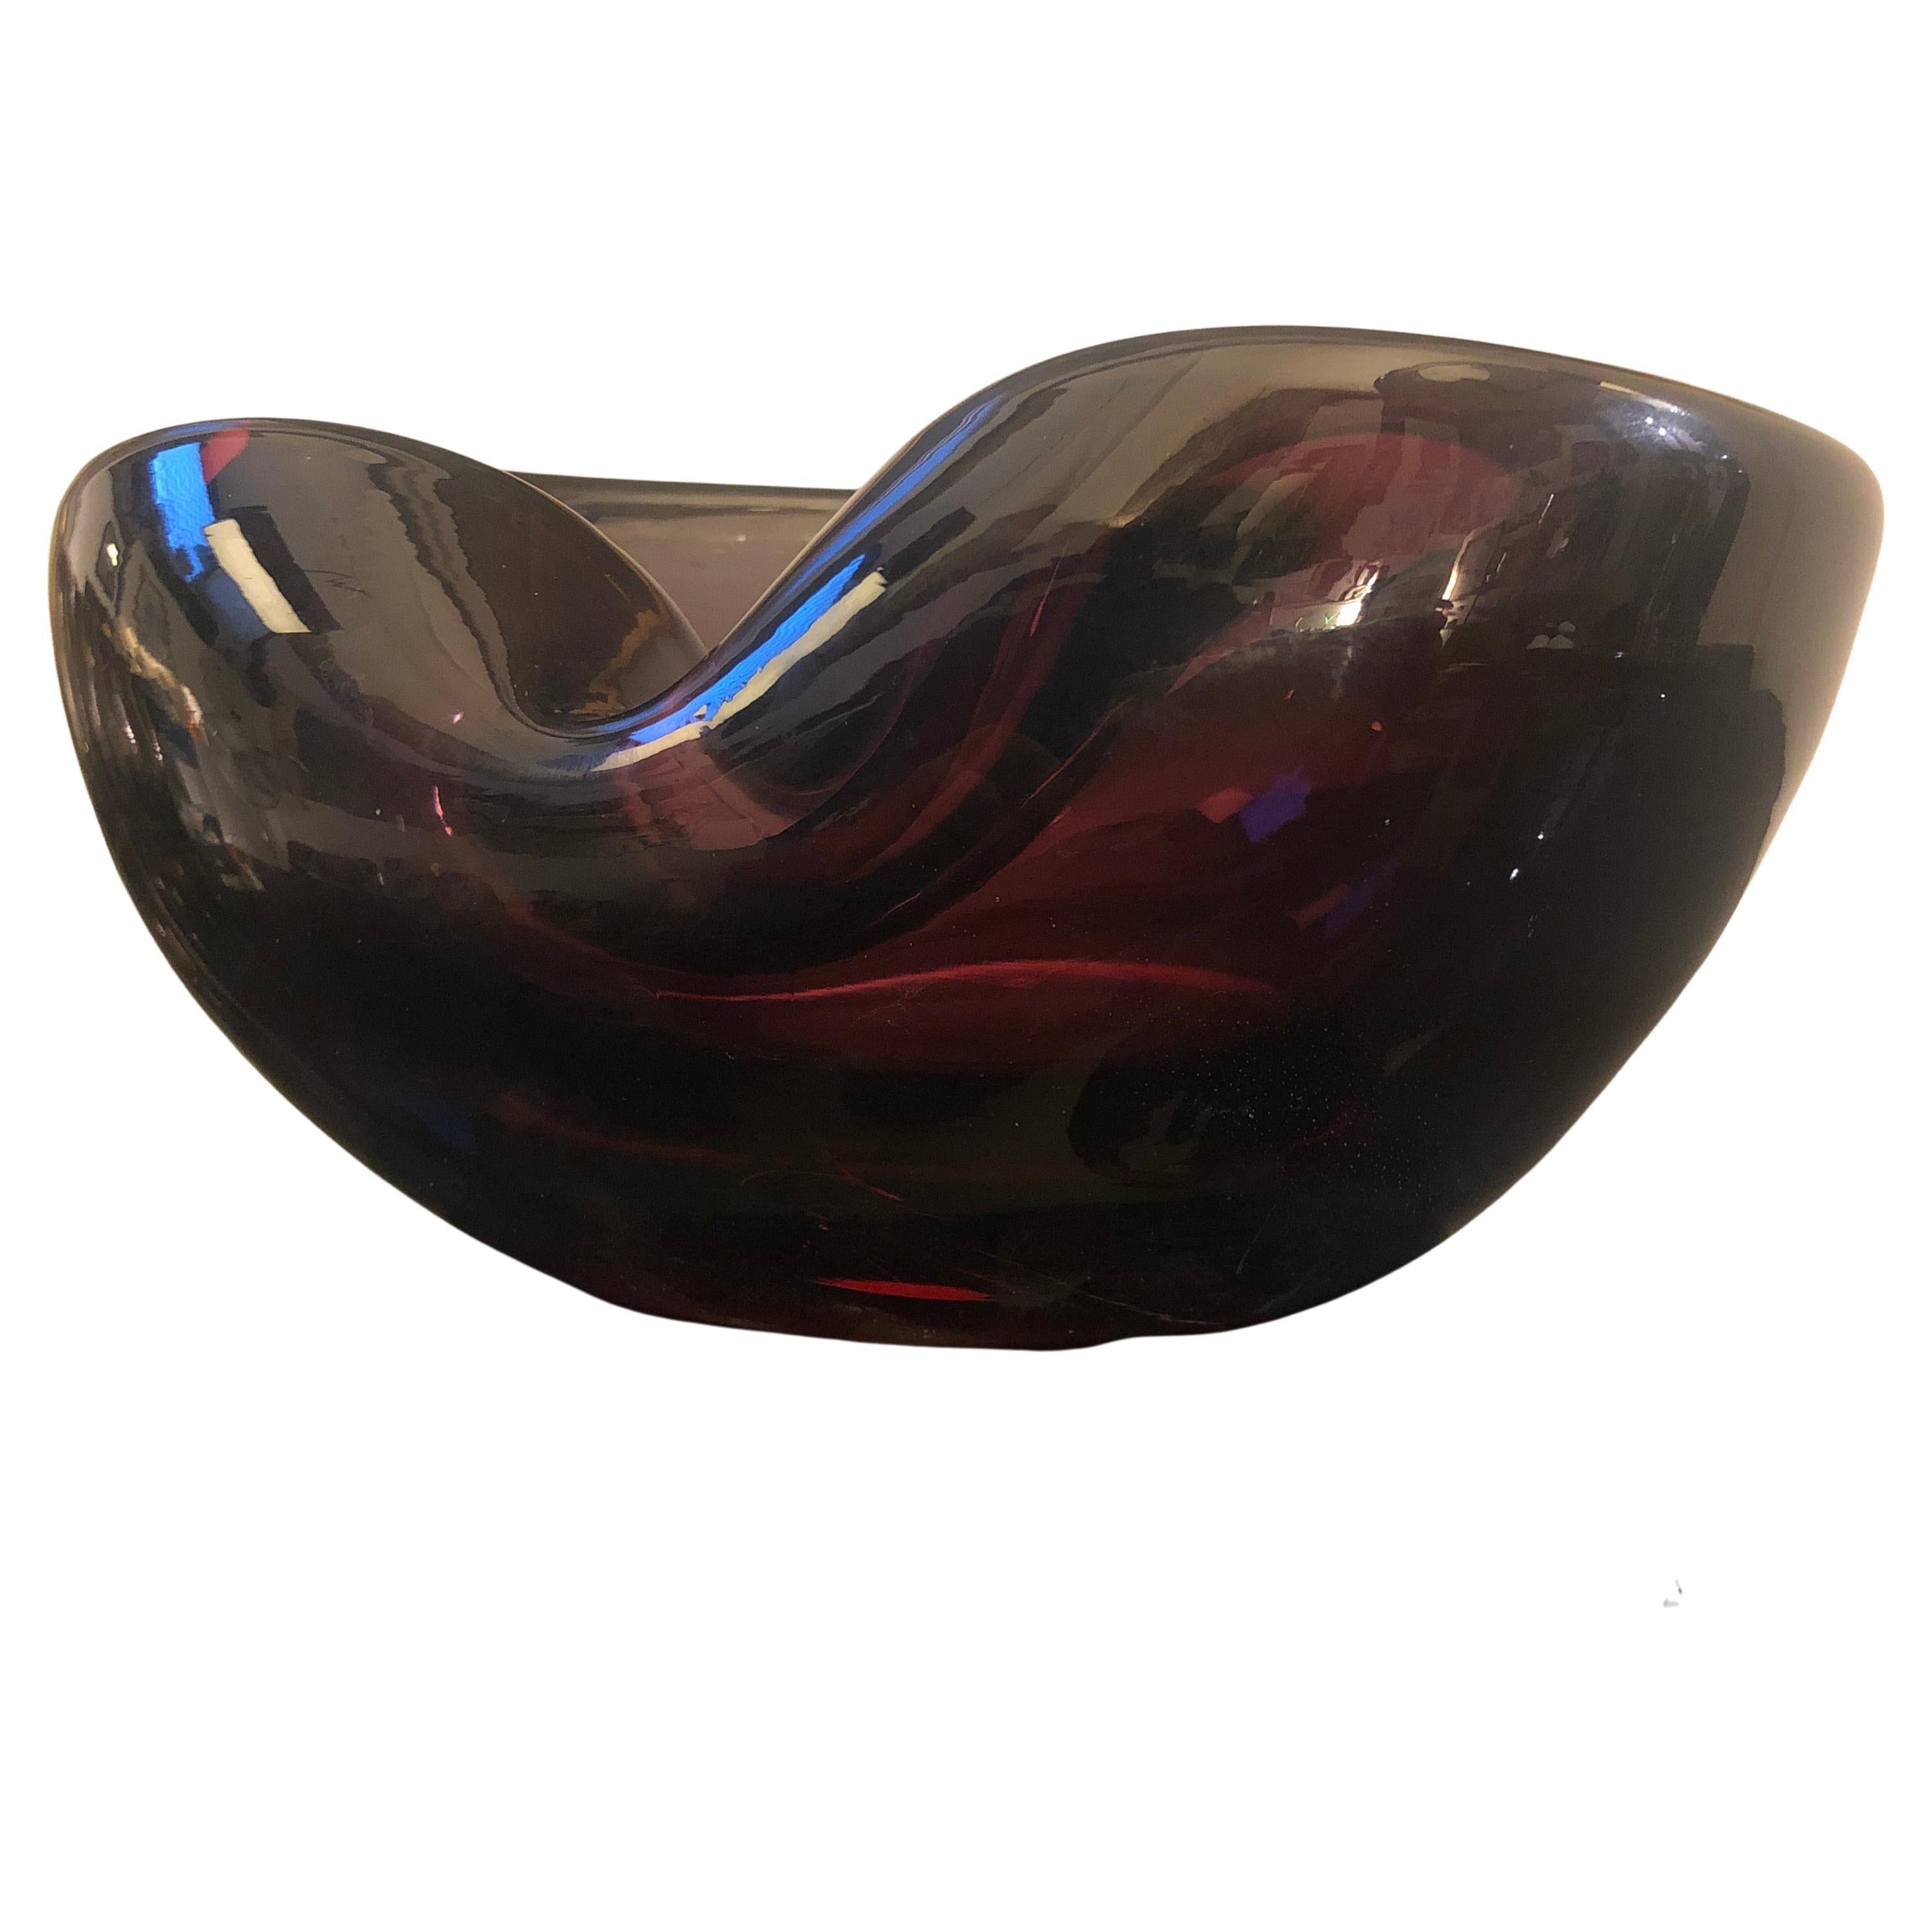 An heavy purple Murano glass bowl  designed and manufactured in Venice by Seguso in the 1970s, it's in perfect conditions. This Ashtray by Seguso is a timeless example of the intersection of art and functionality. It captures the spirit of the era's